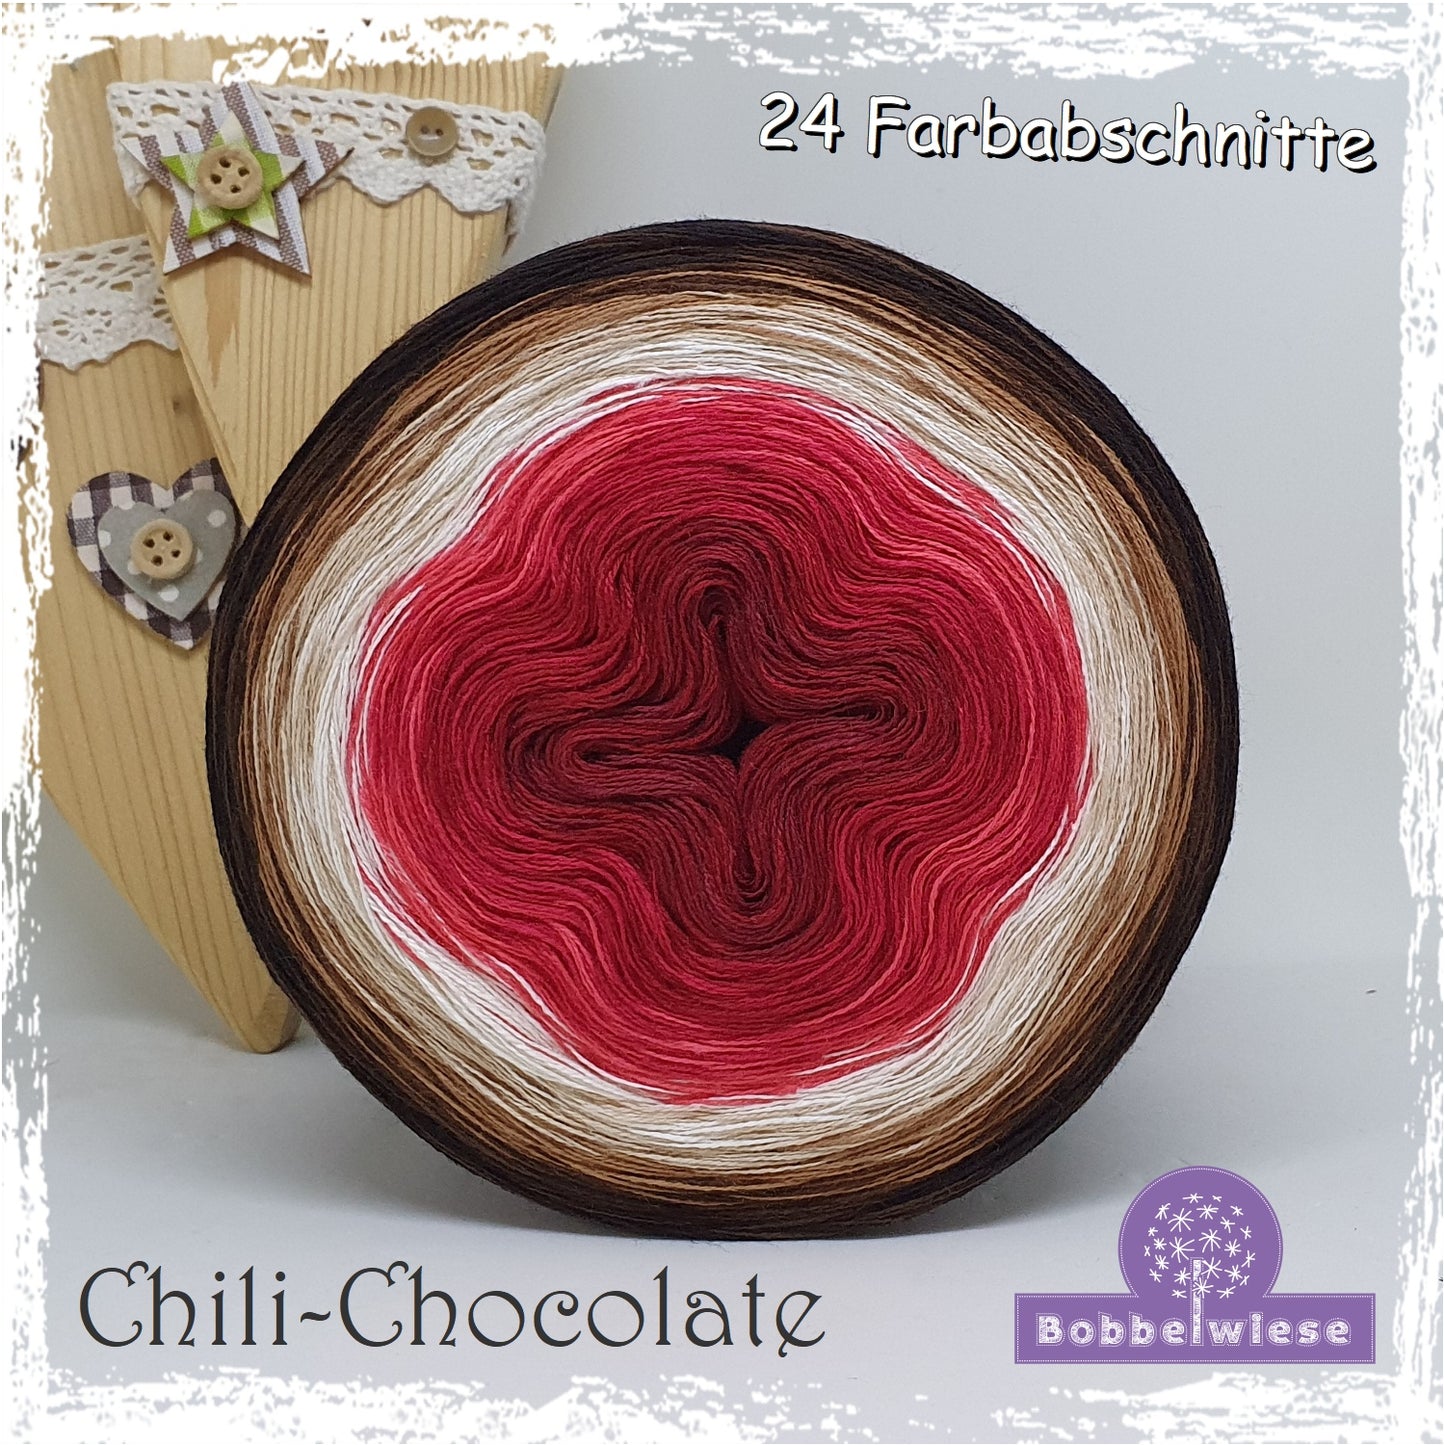 Bobbel "Chili-Chocolate", 24 Farbabschnitte, 4fädig